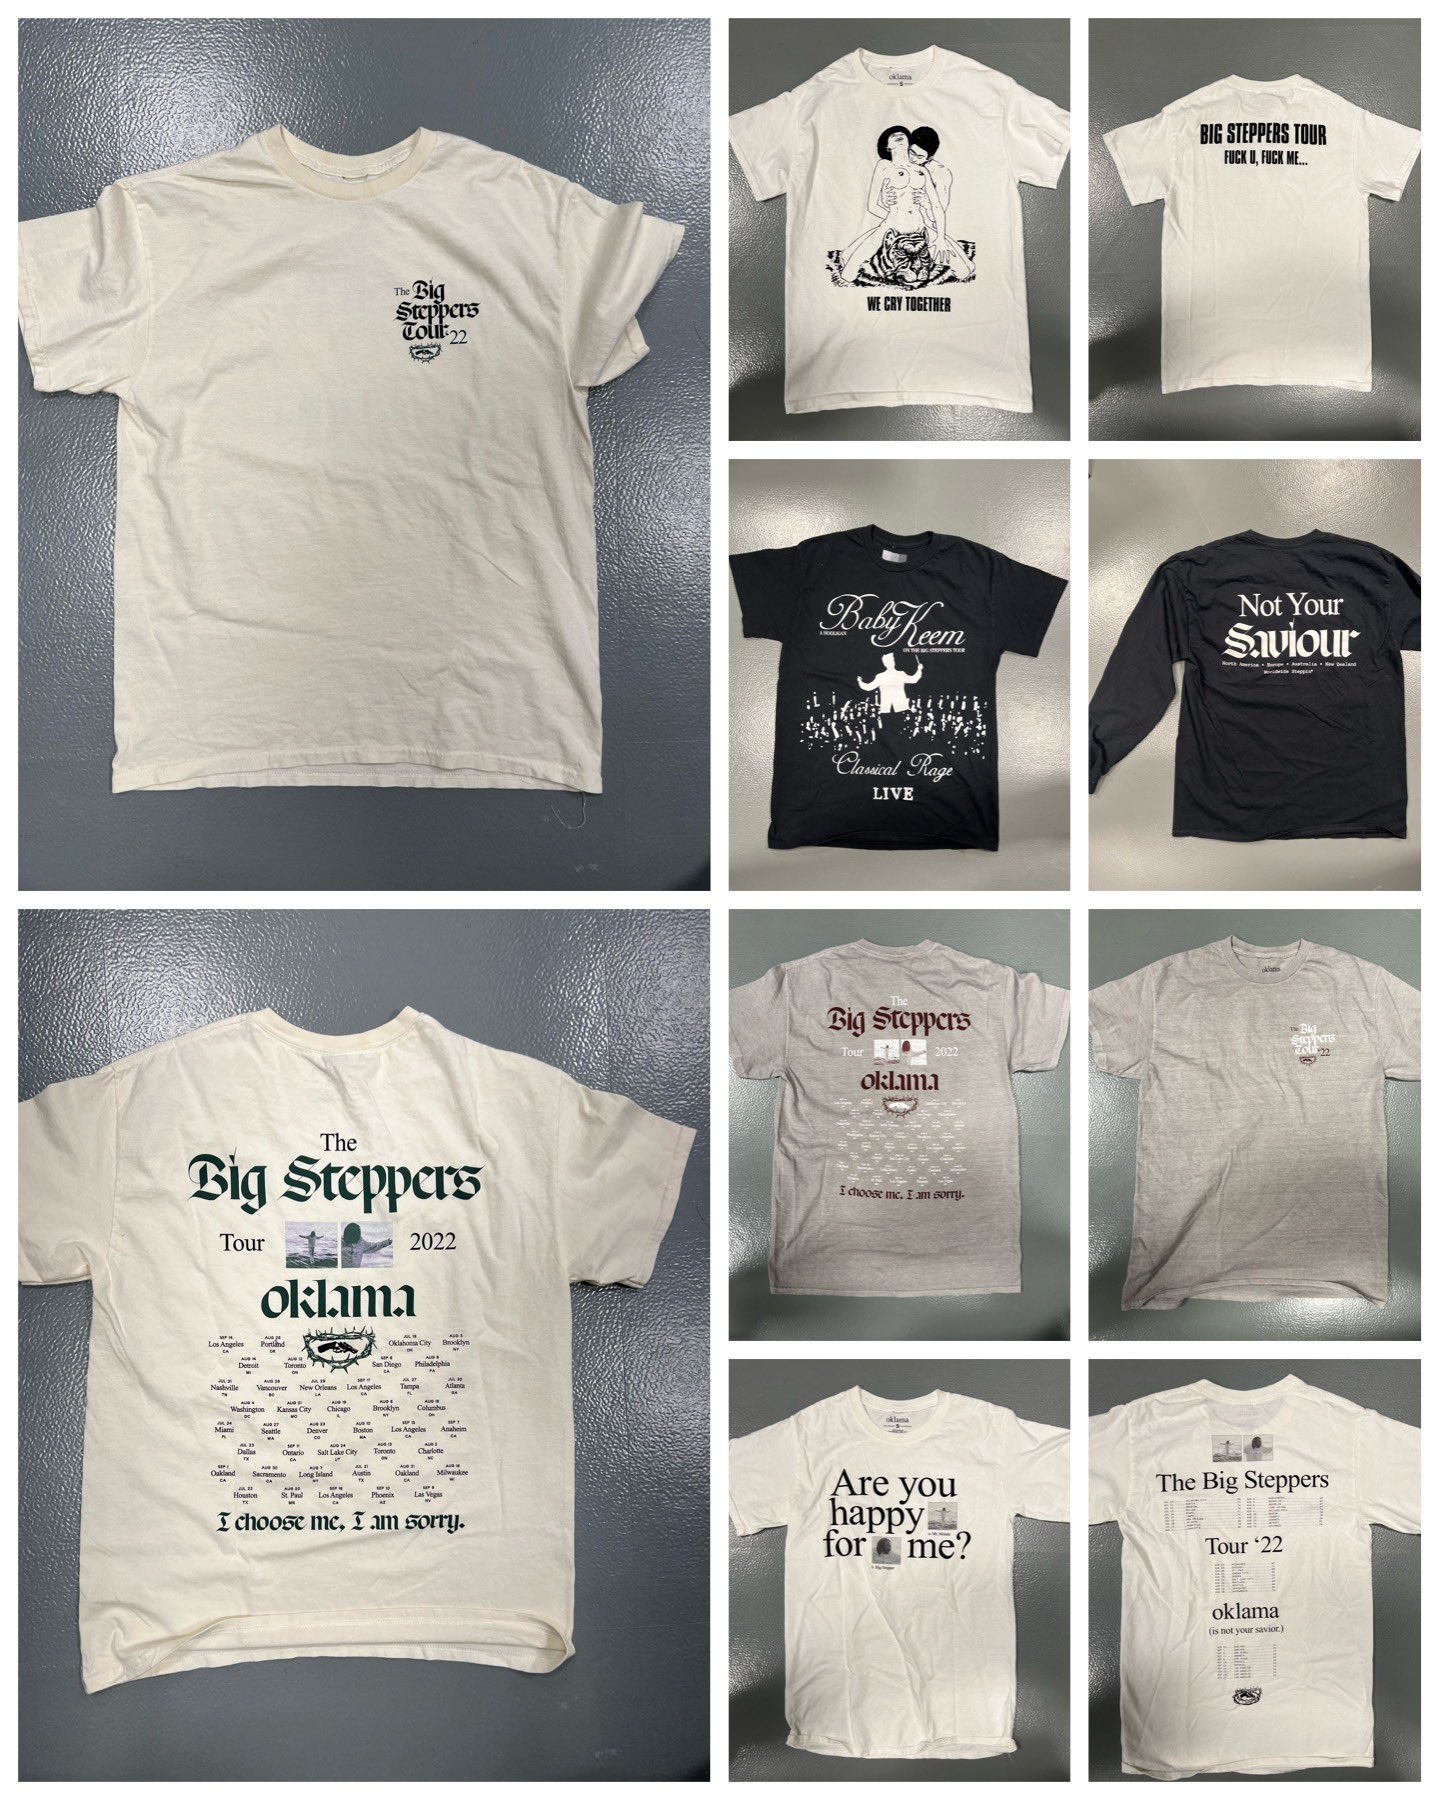 linnen limoen Monetair KENDRICK LAMAR BIBLE on Twitter: "Some of the merch available at the “The  Big Steppers Tour” https://t.co/bPOV0obUOb" / Twitter